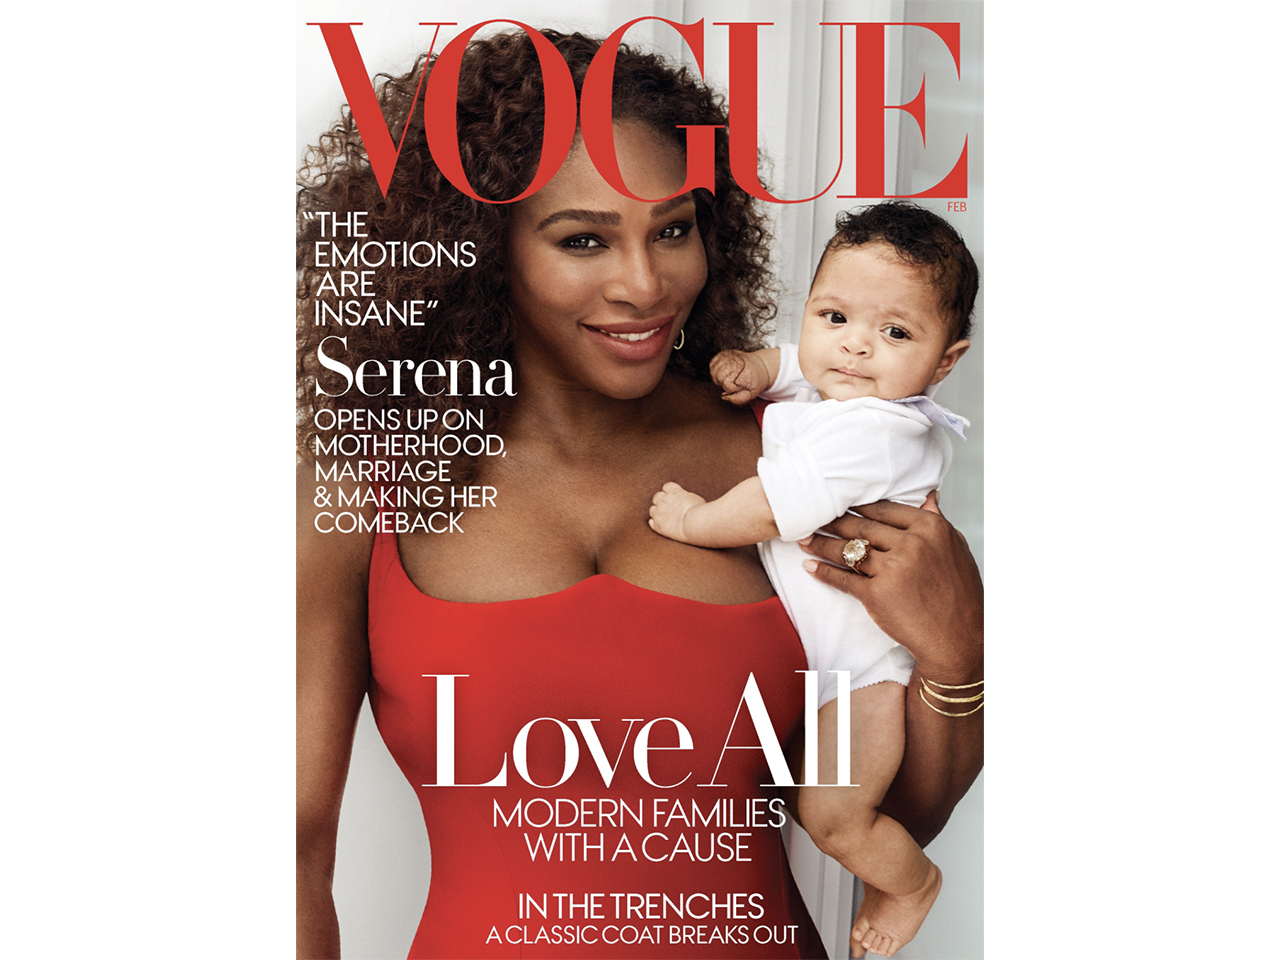 Serena Williams and her baby, Alexis Jr.